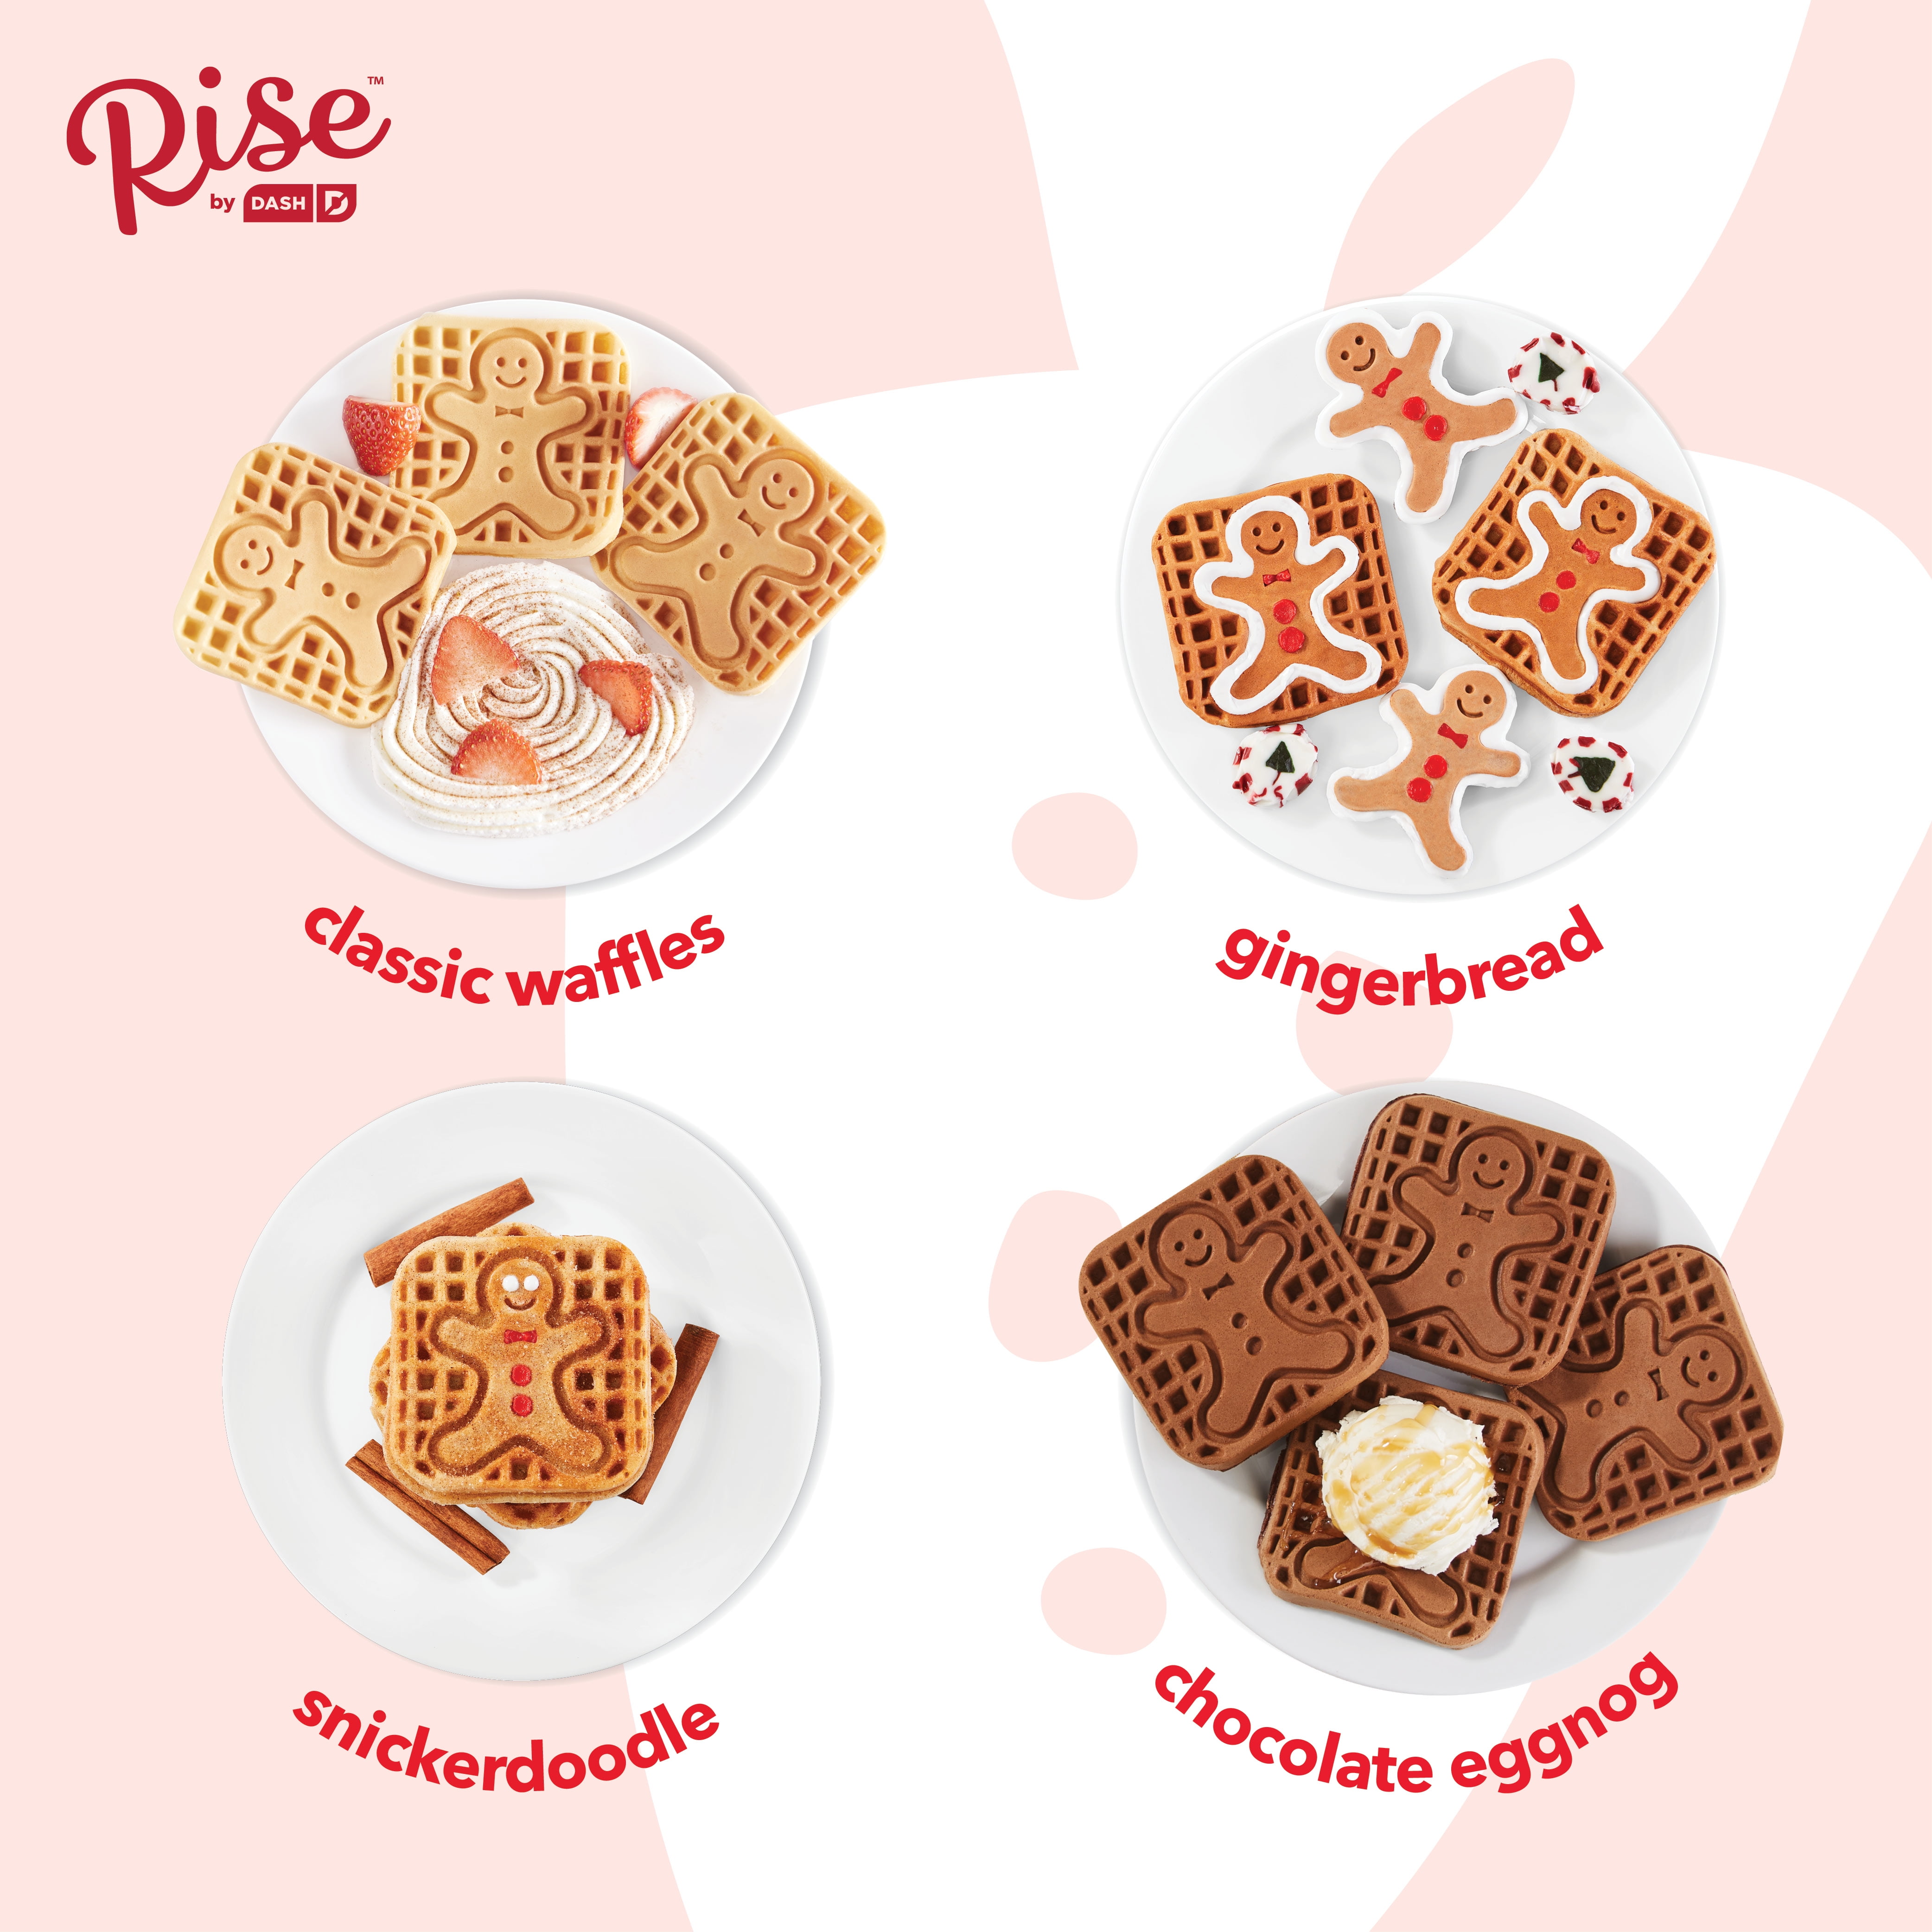 Mini Waffle Maker Gingerbread Man by Dash 4 Cooking Surface